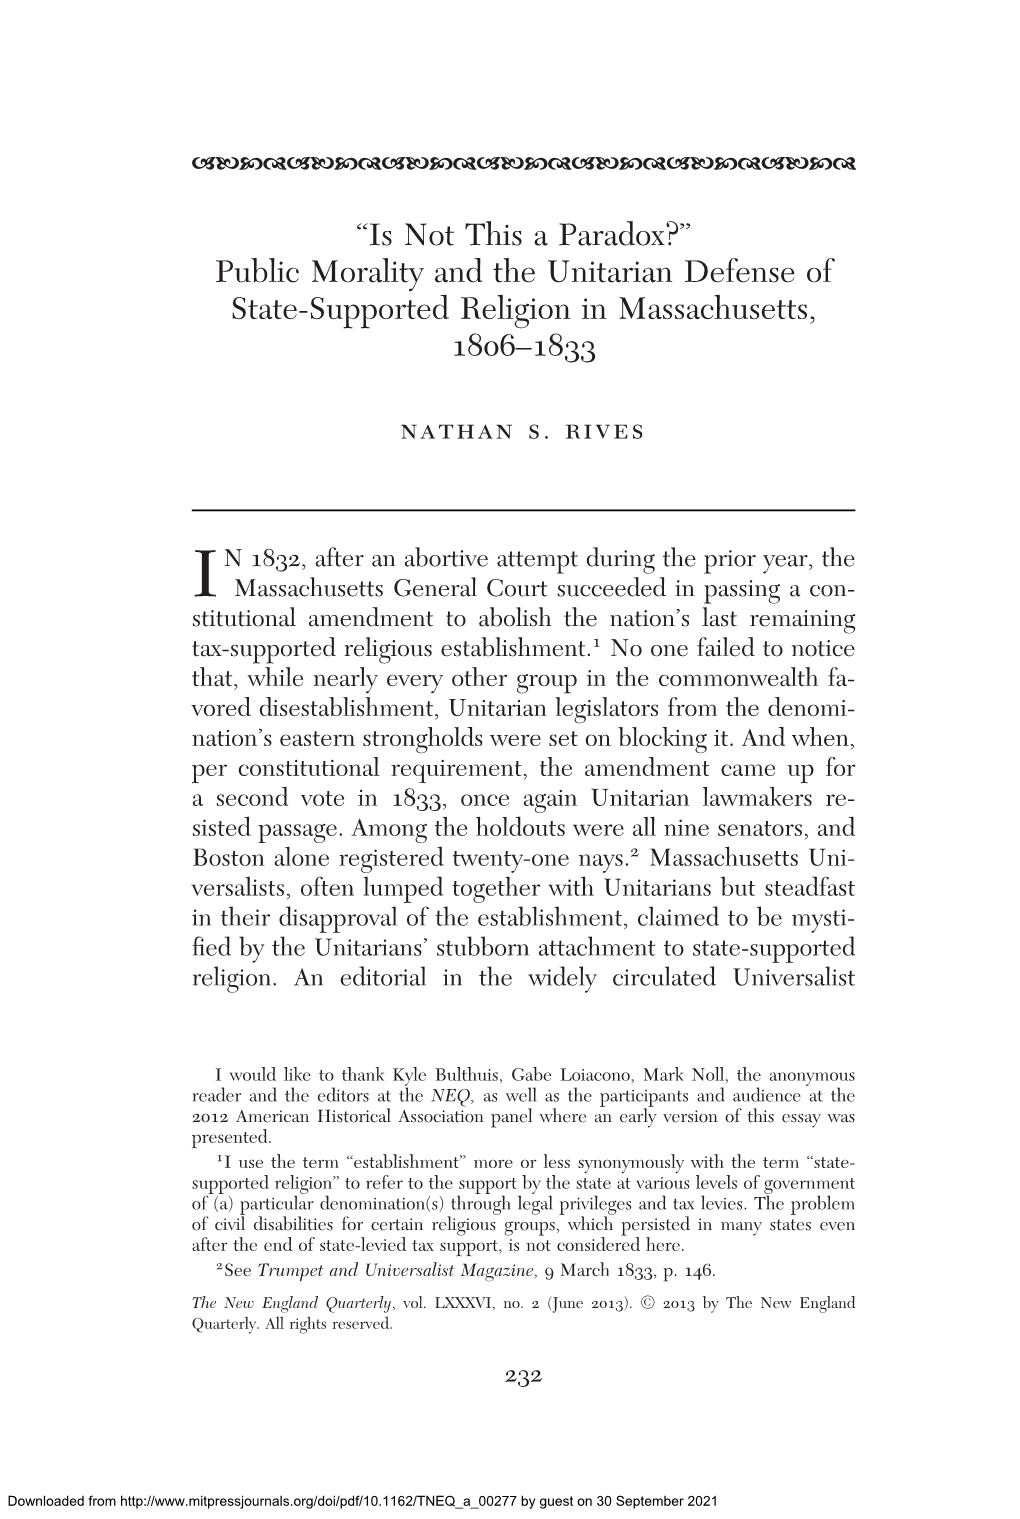 Public Morality and the Unitarian Defense of State-Supported Religion in Massachusetts, 1806–1833